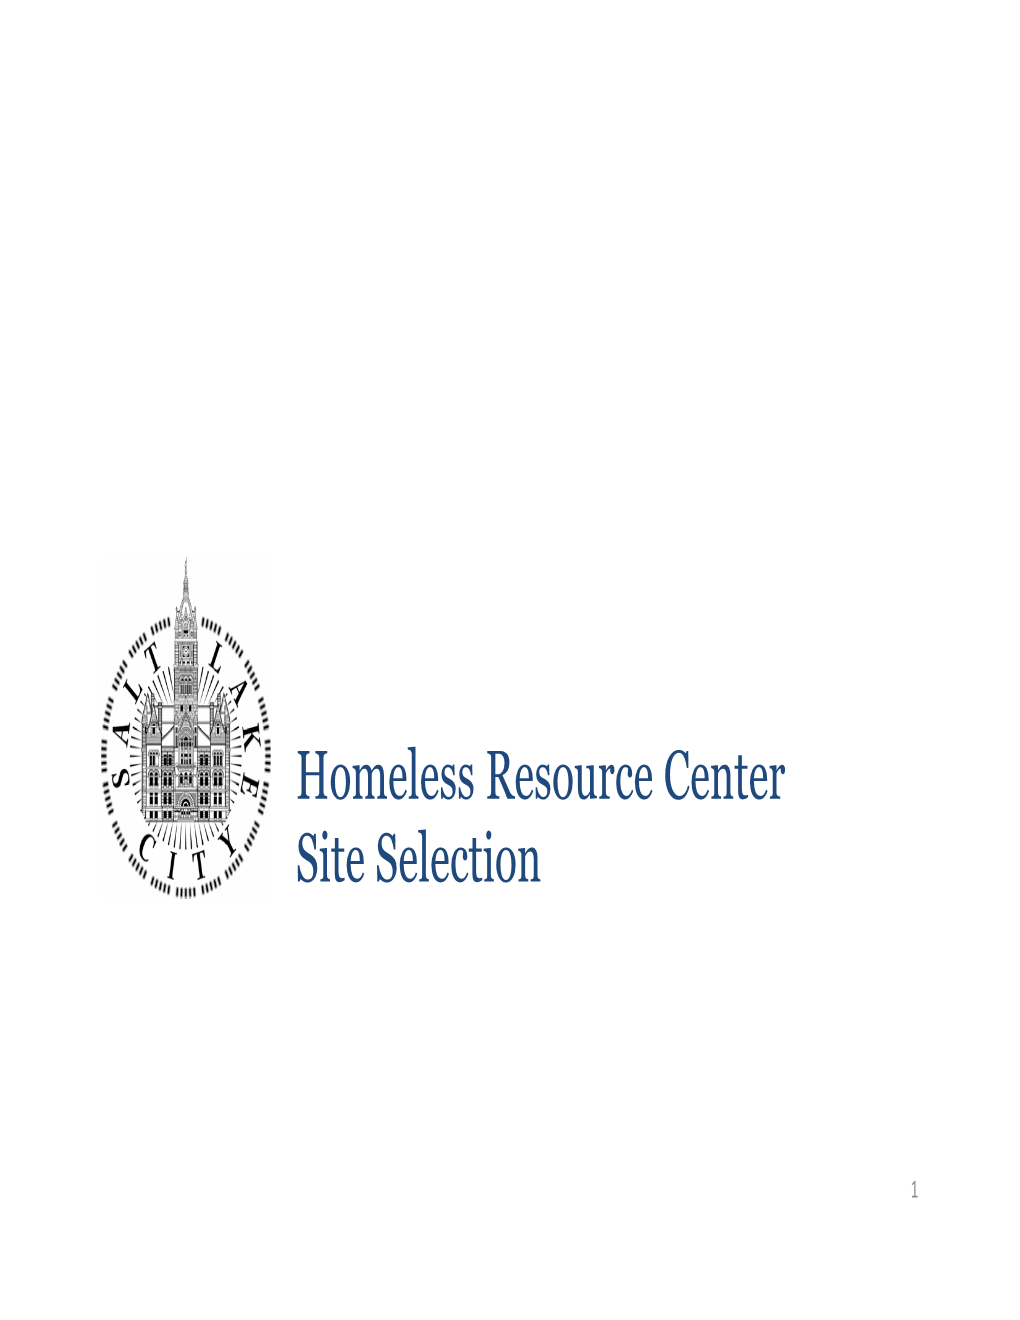 Homeless Resource Center Site Selection